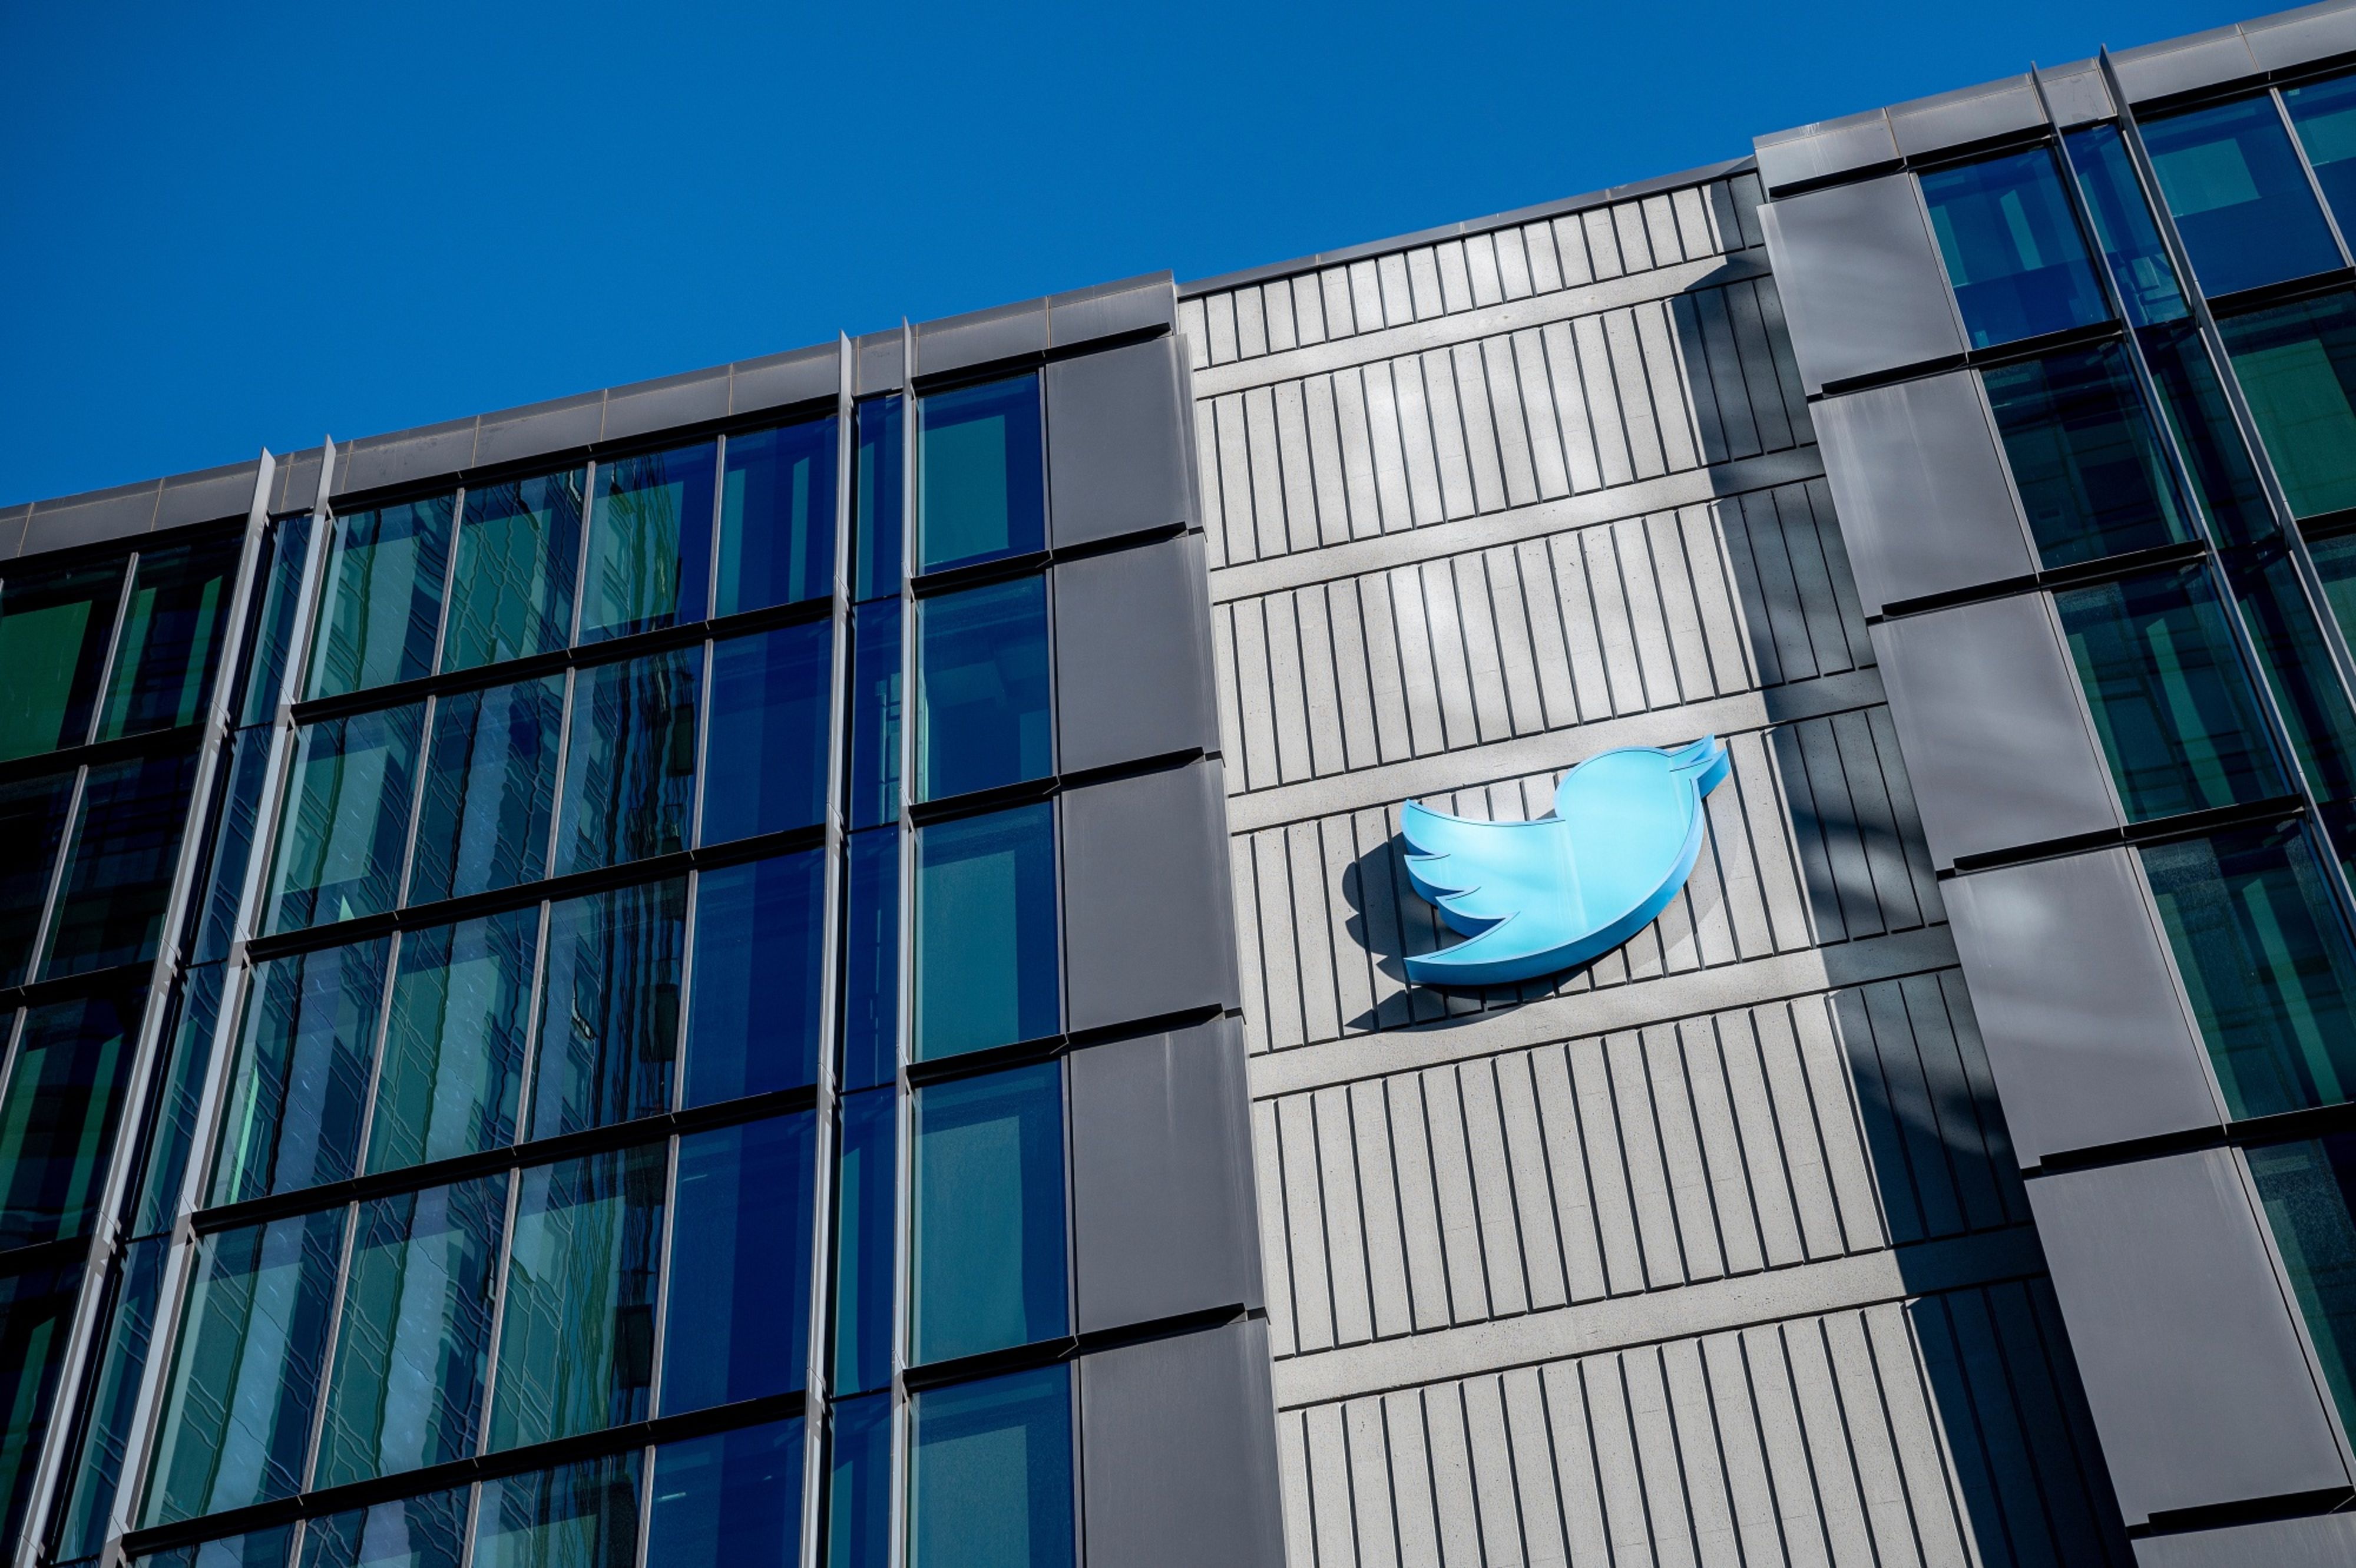 Office or hotel? Photos show beds at Twitter headquarters